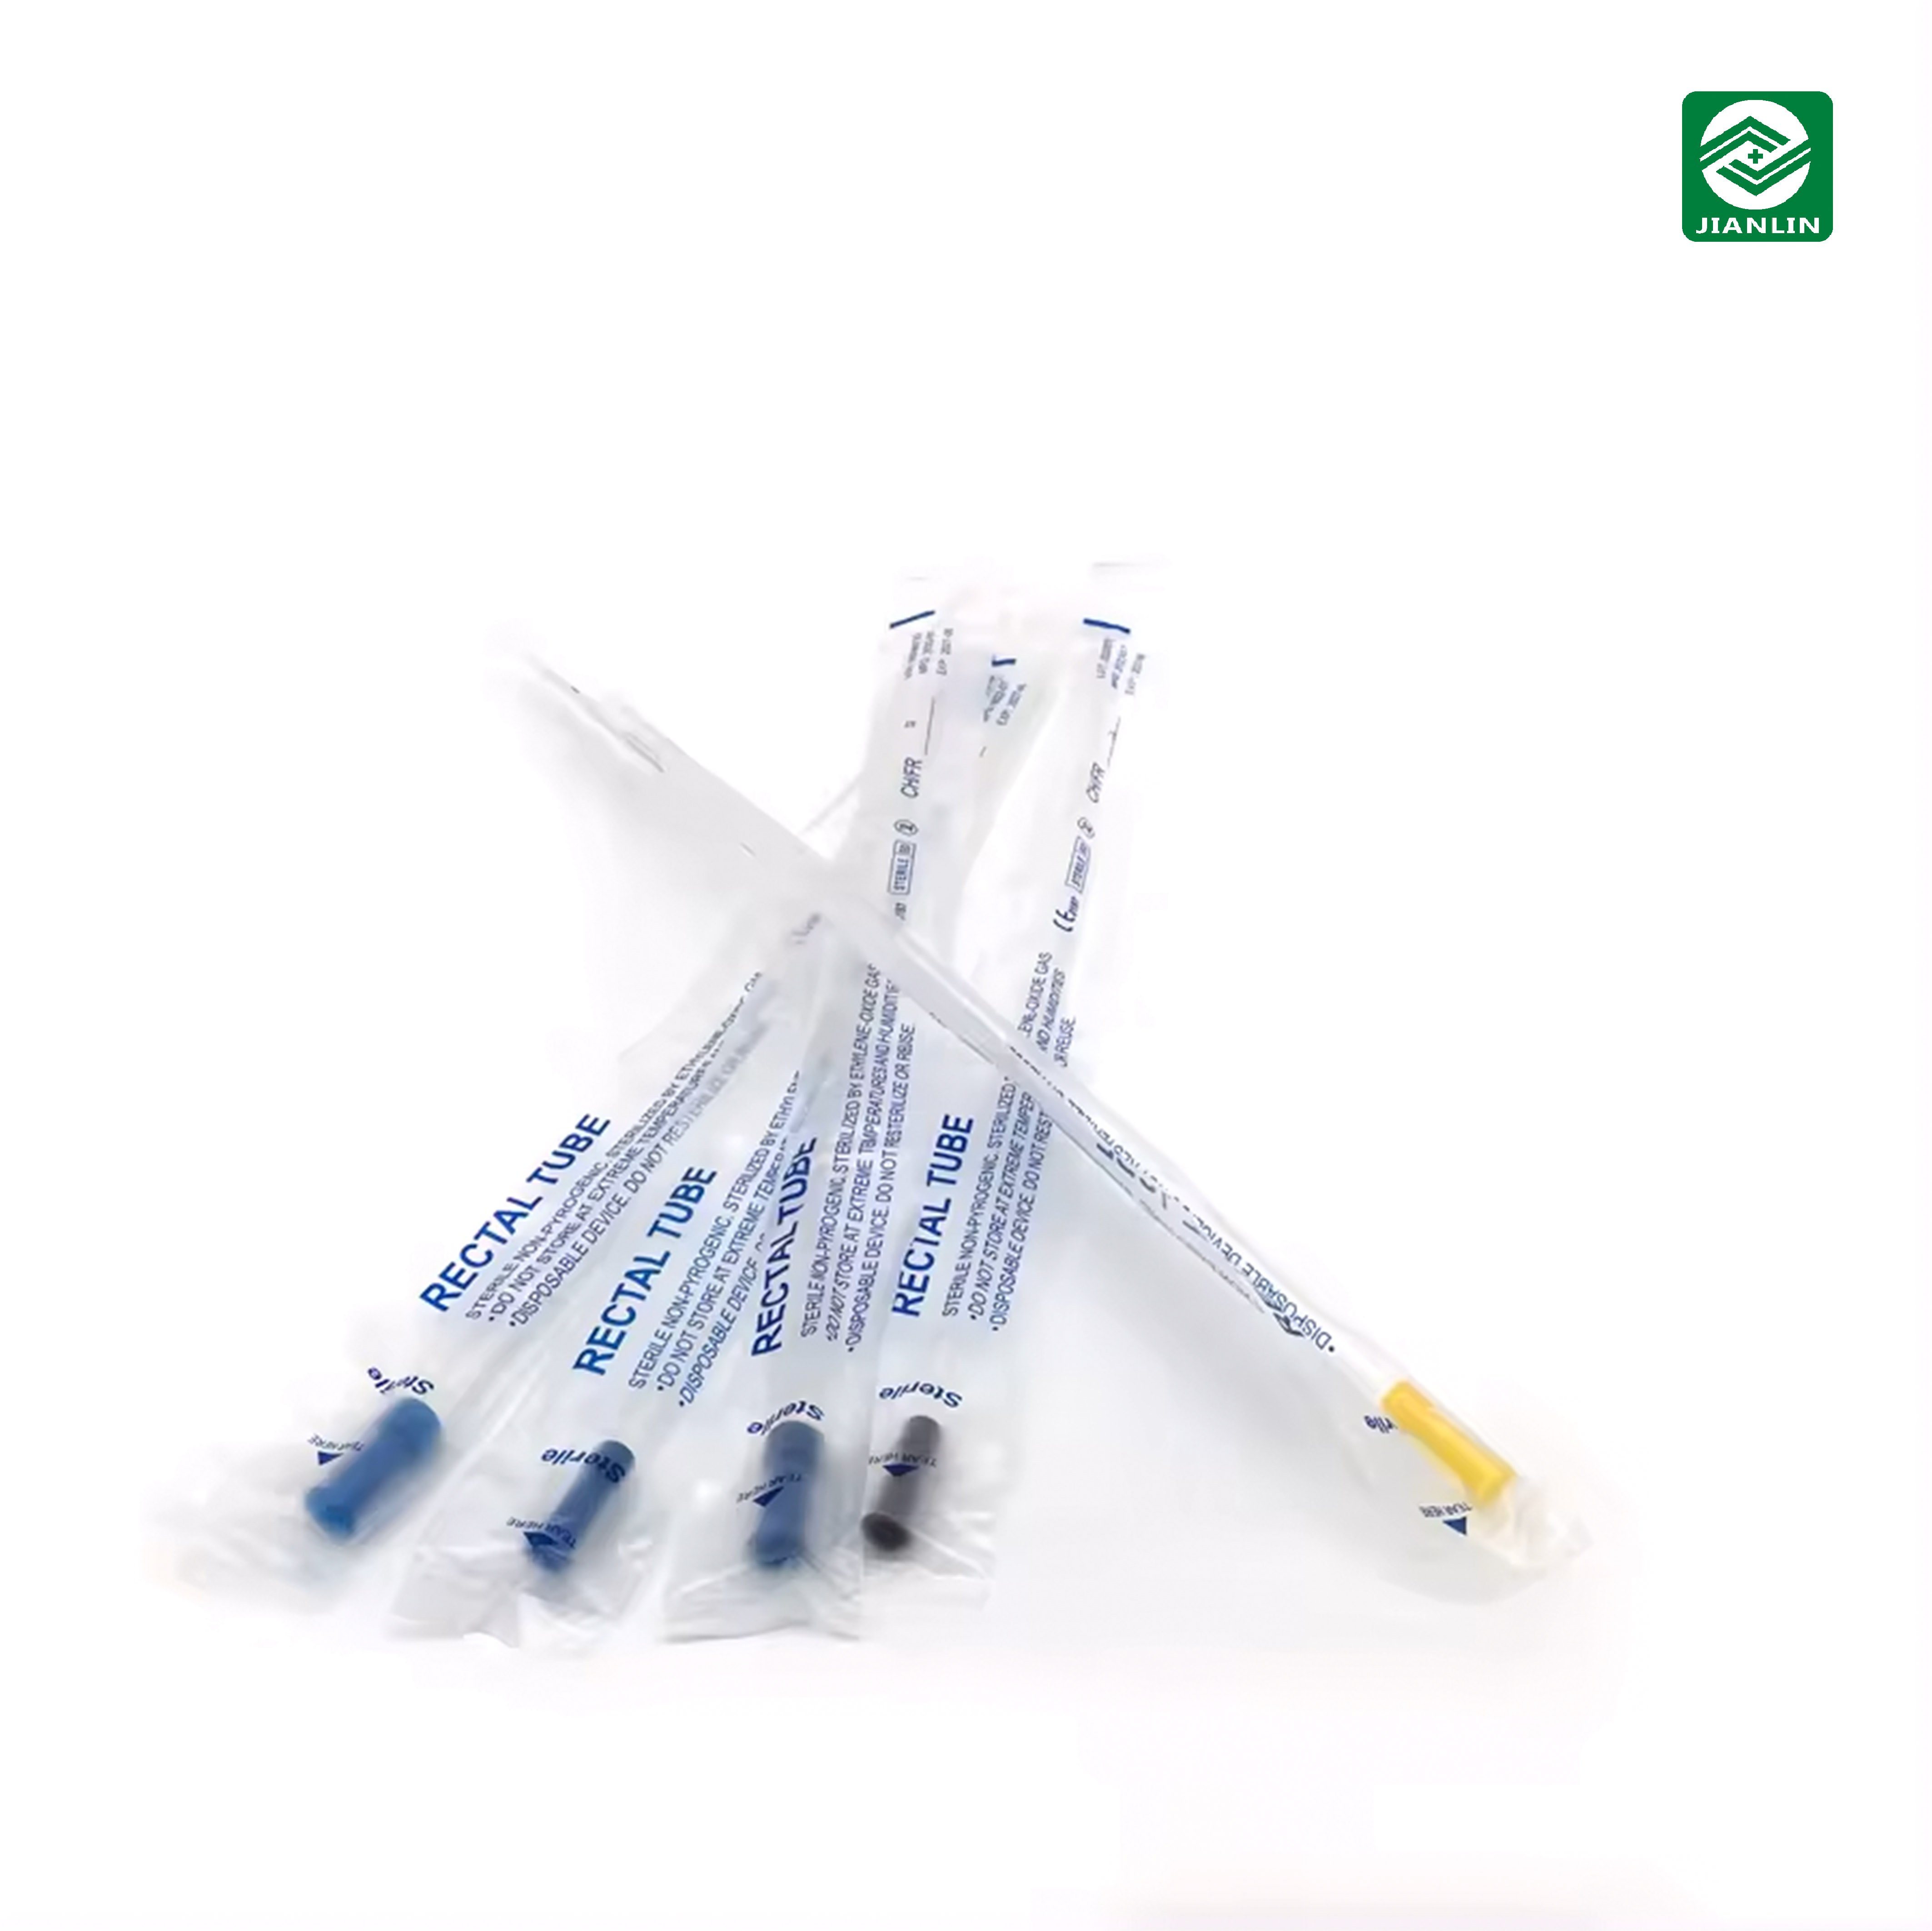 PVC (DEHP-FREE) Medical Sterile Disposable Rectal Tube ISO13485 CE